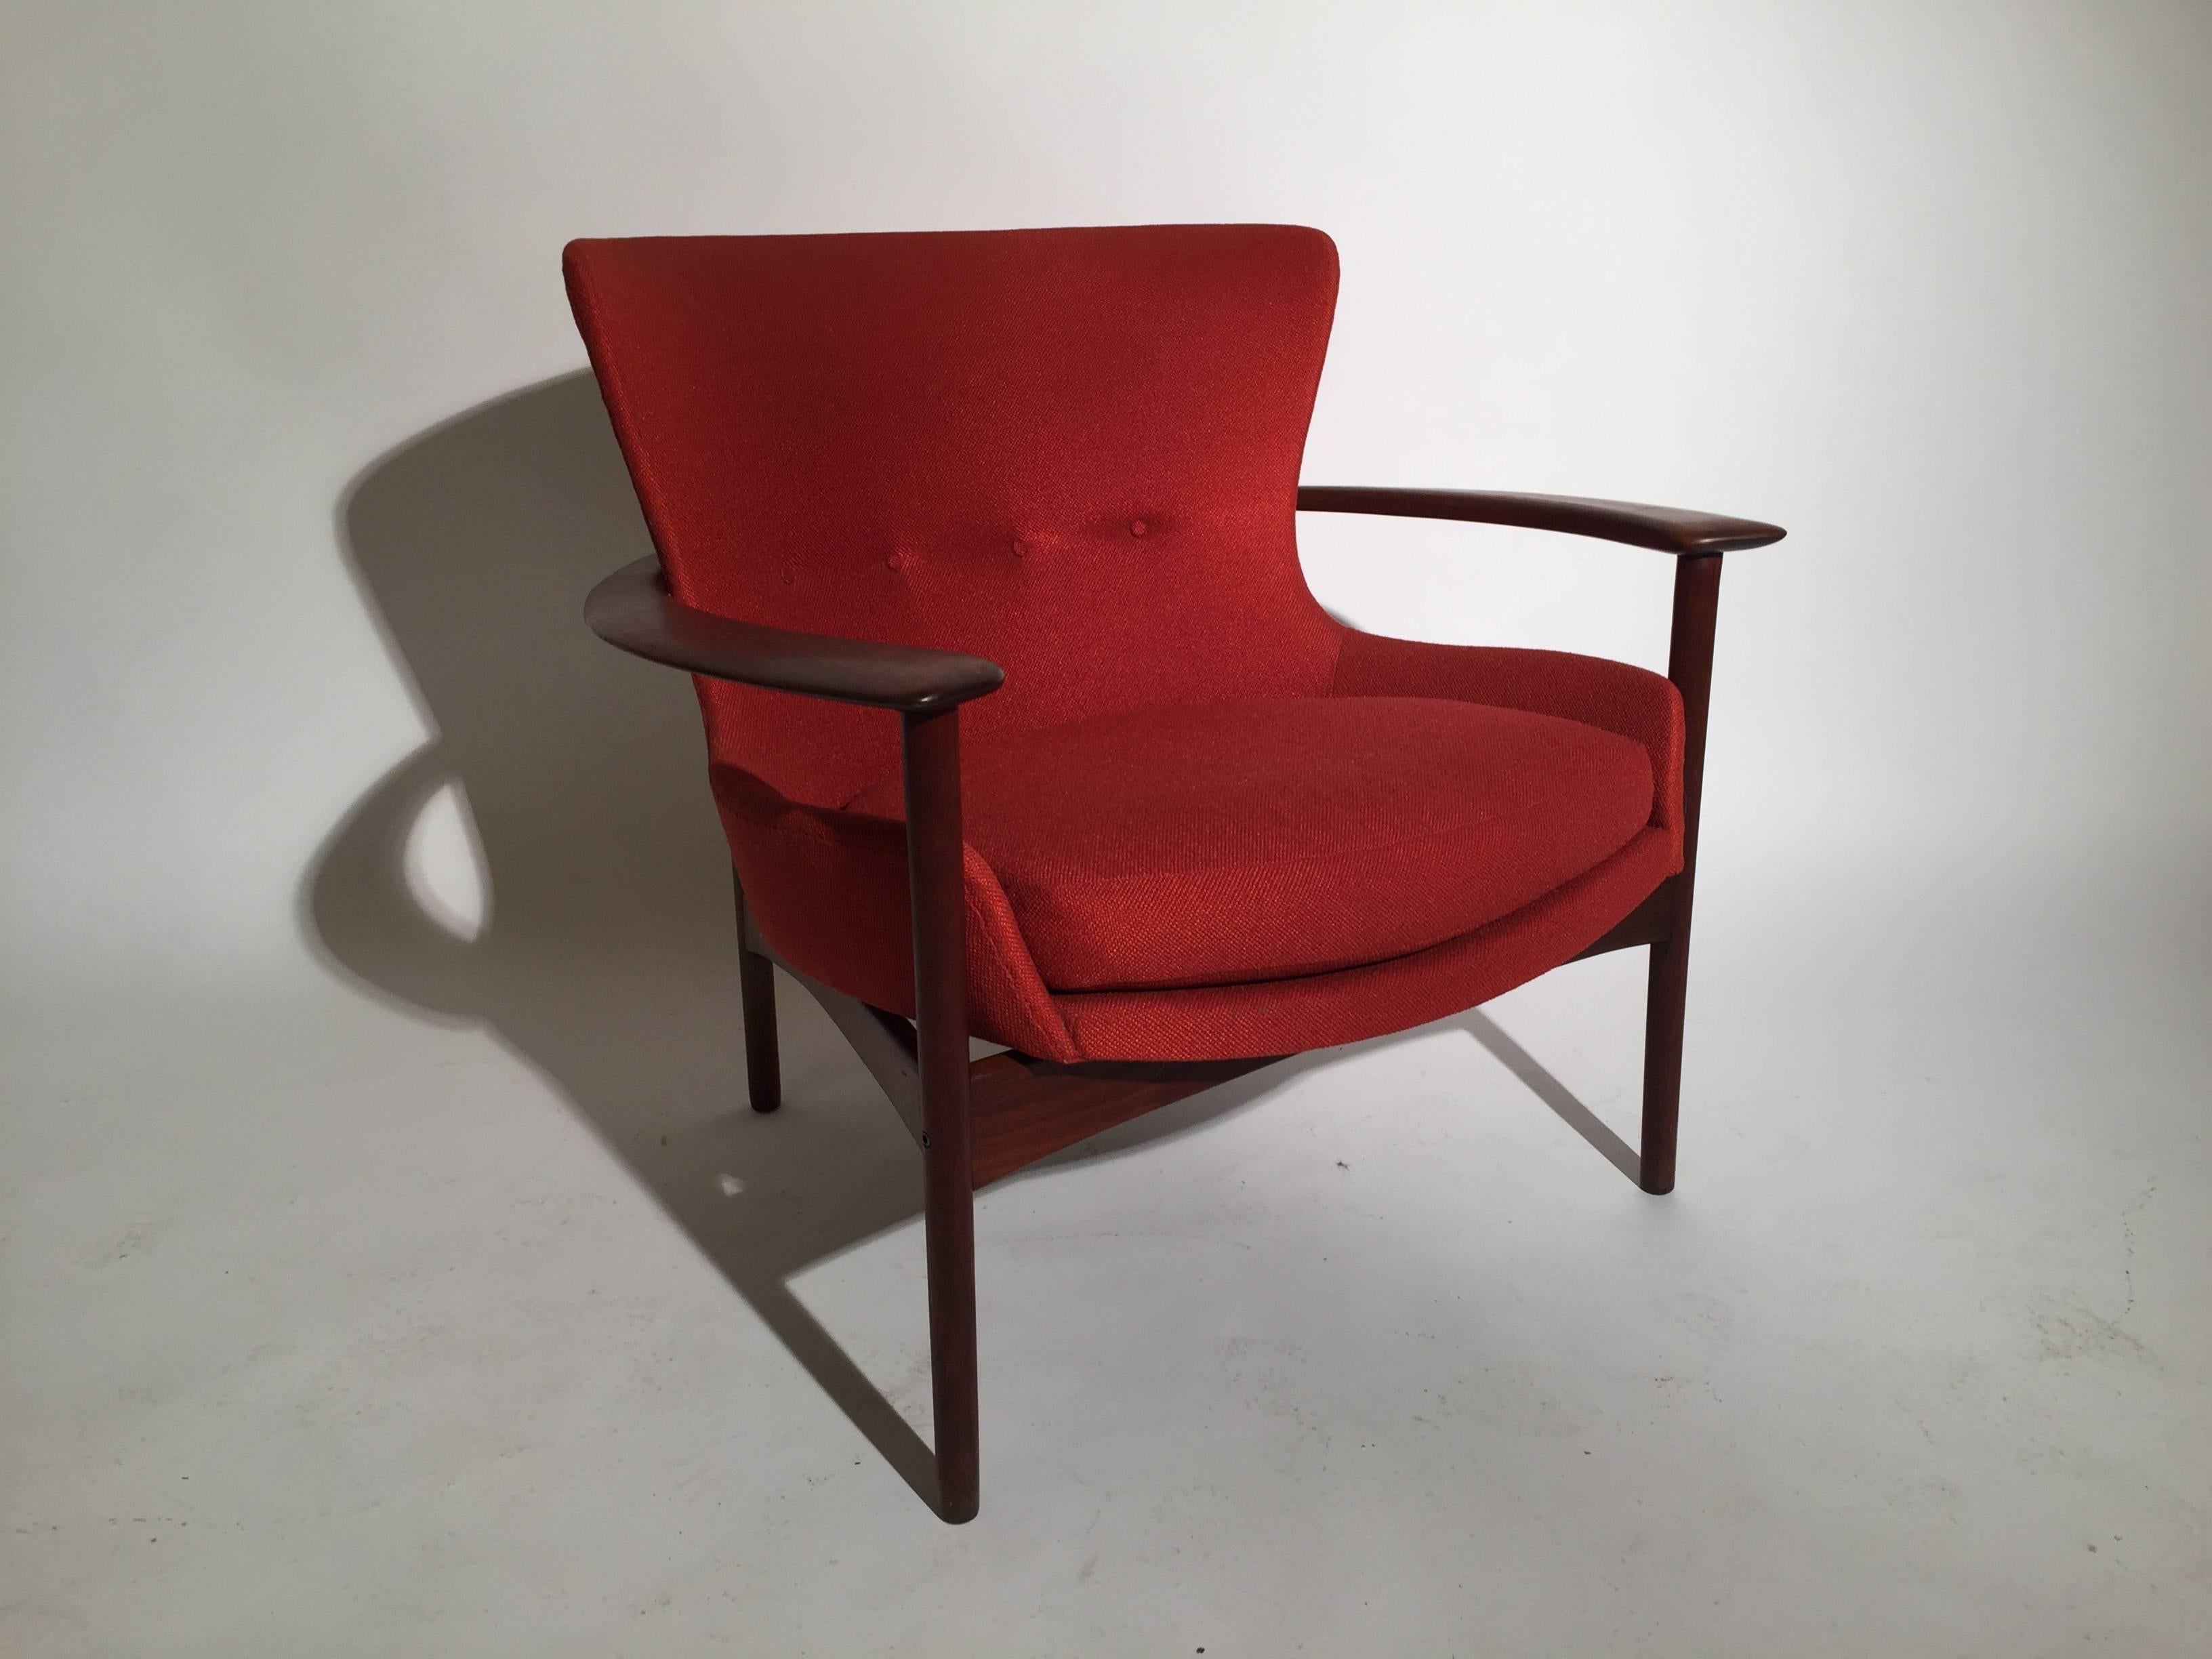 High style and dramatic Larsen for Selig teak lounge chair, circa 1950s. Original rust or burnt orange upholstery in near-perfect condition, and teak frame with warm brown patina with a few dings as can be expected of a 60 year old chair. Selig